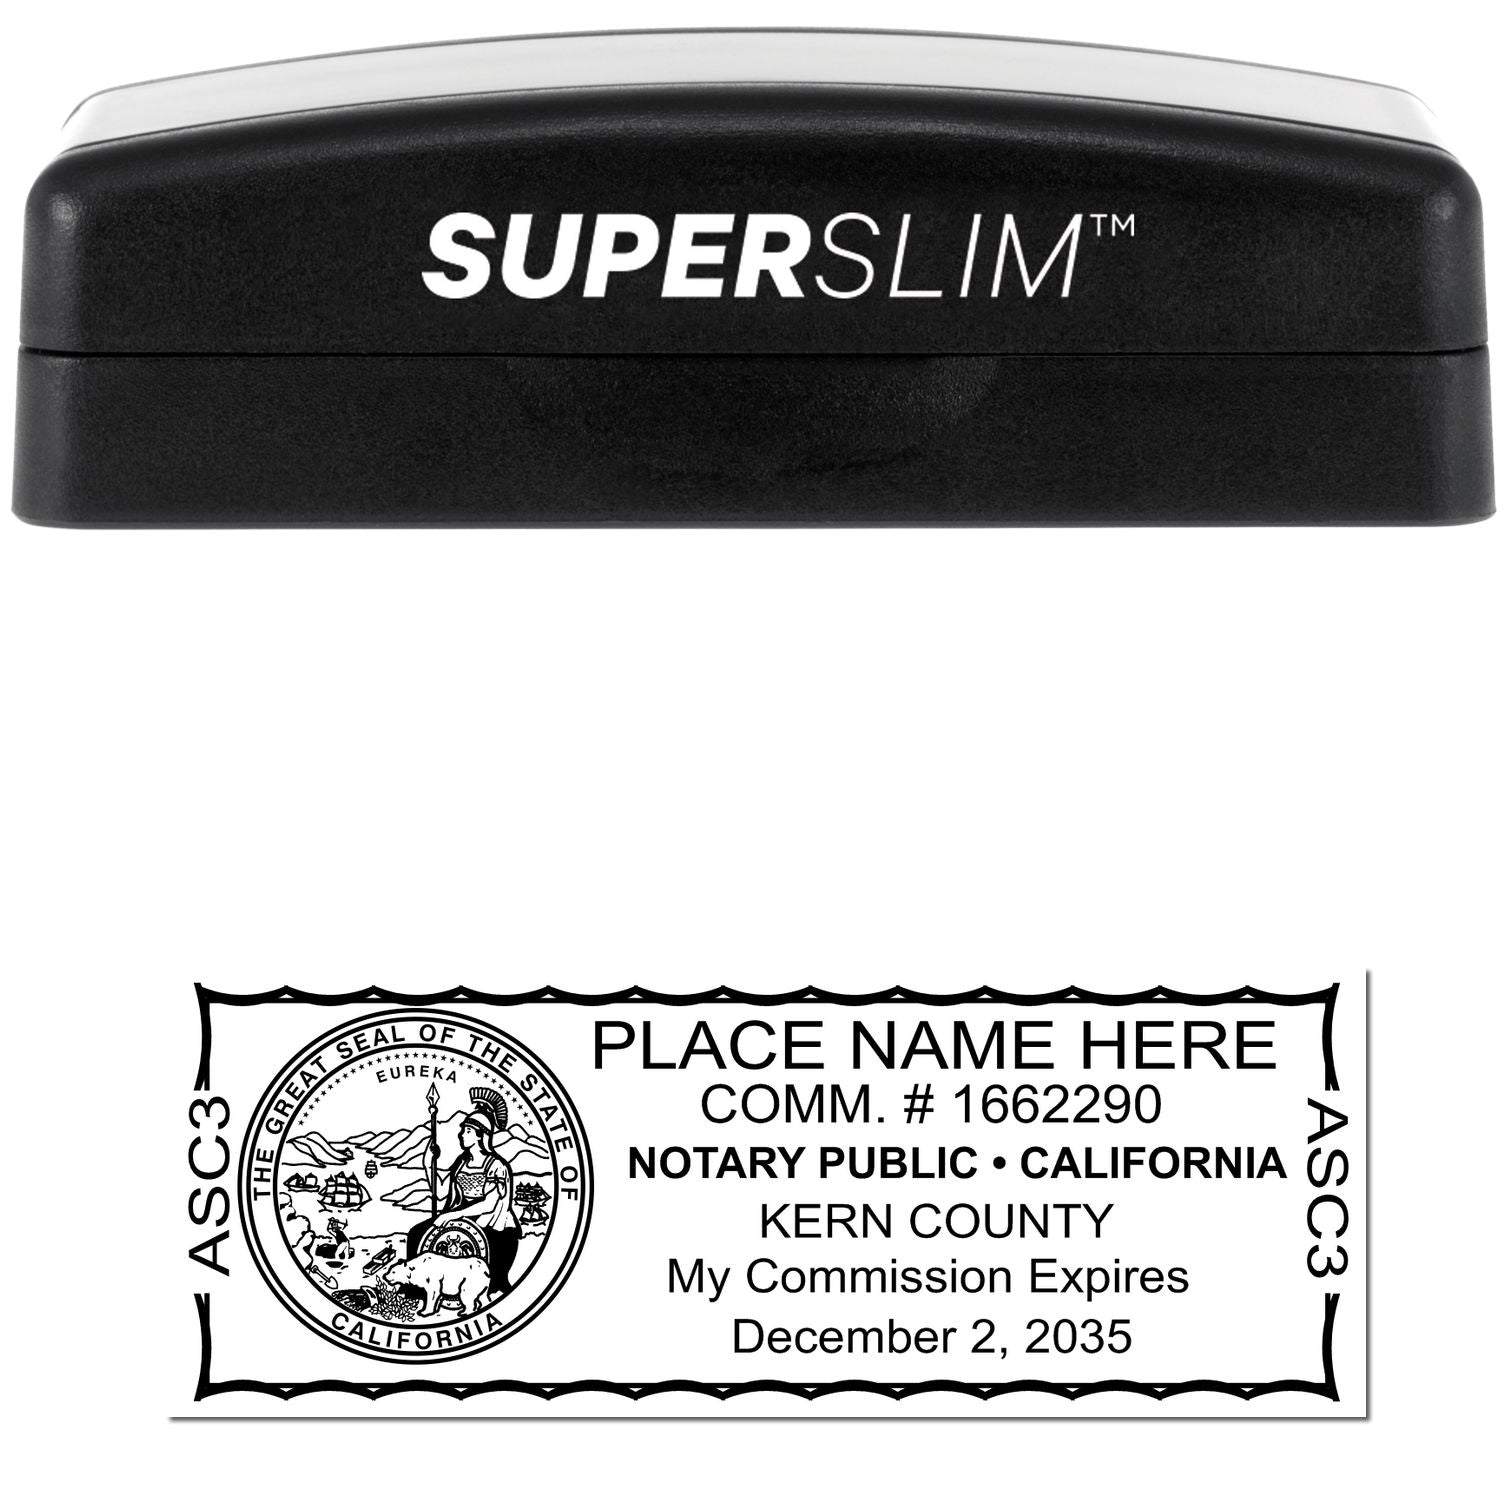 The main image for the Super Slim California Notary Public Stamp depicting a sample of the imprint and electronic files